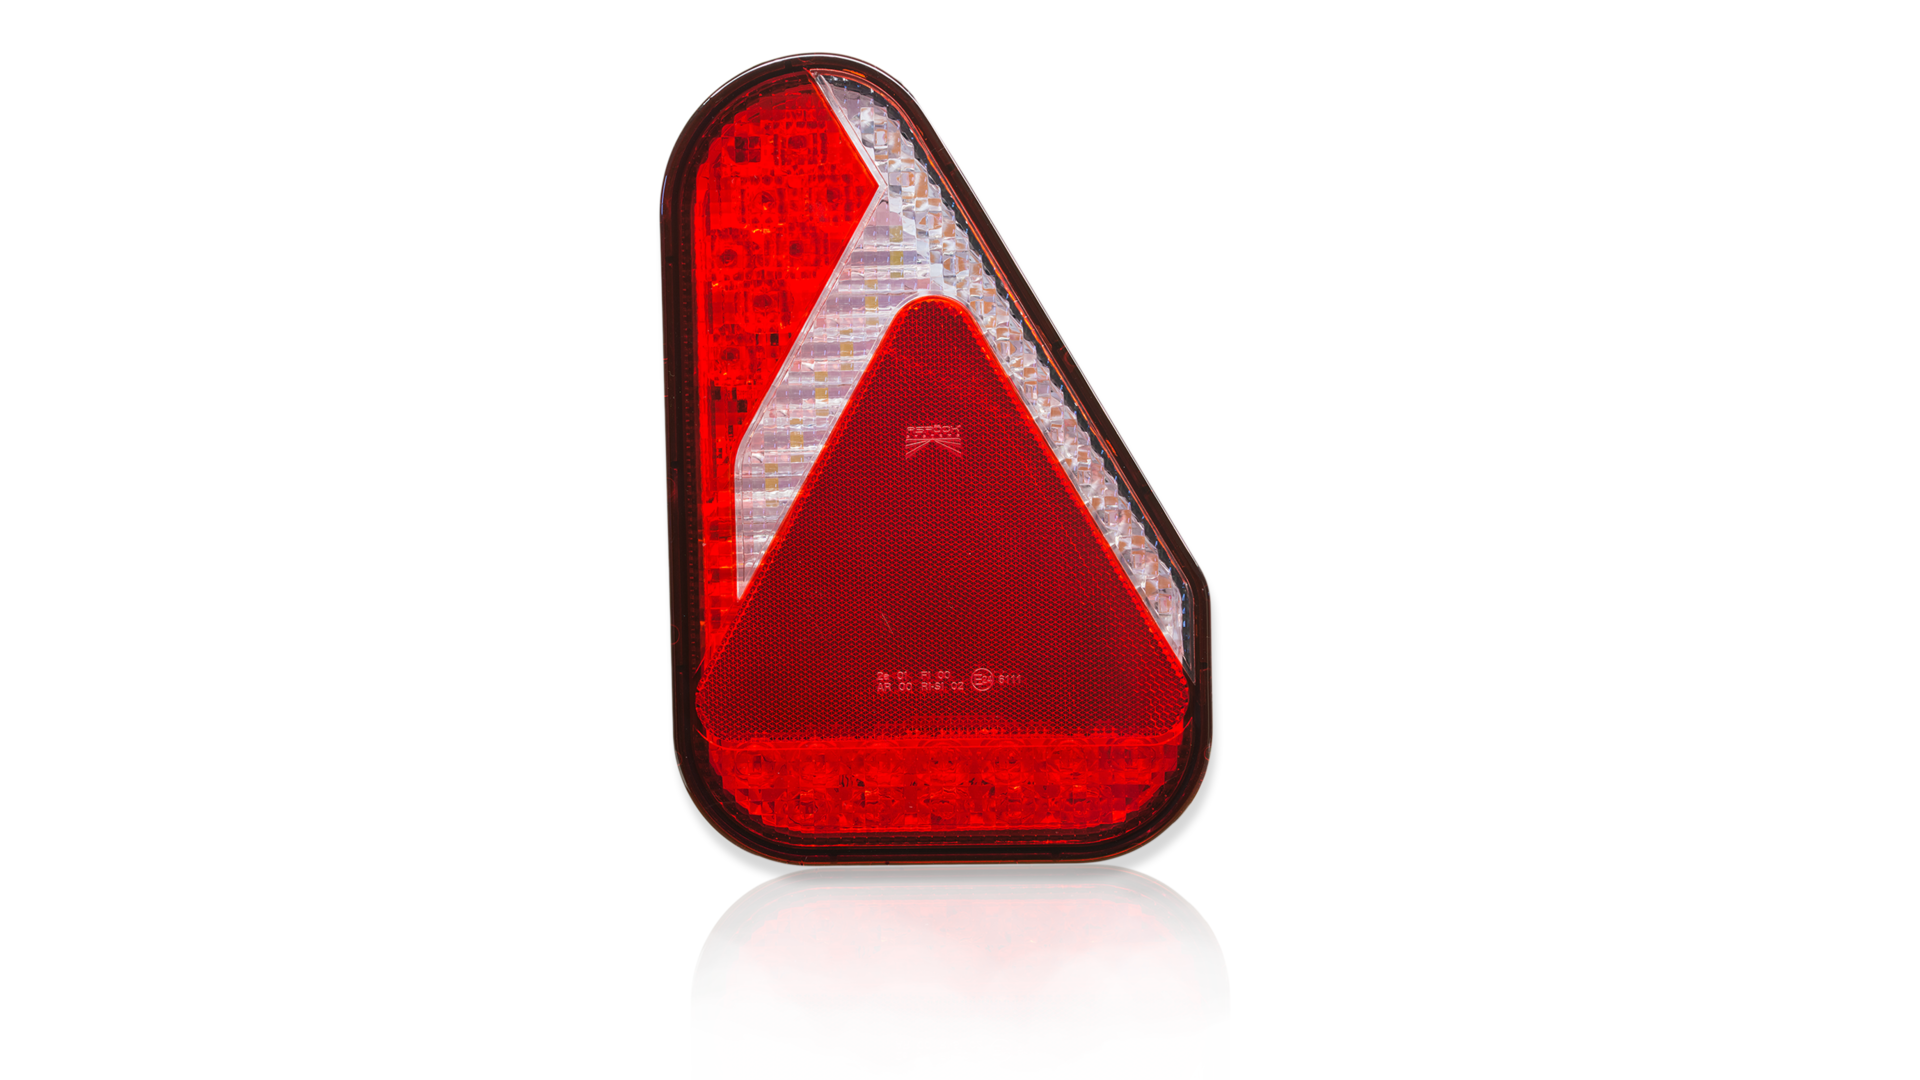 Aspöck Multipoint II rear light set left and right for car trailer-990001751